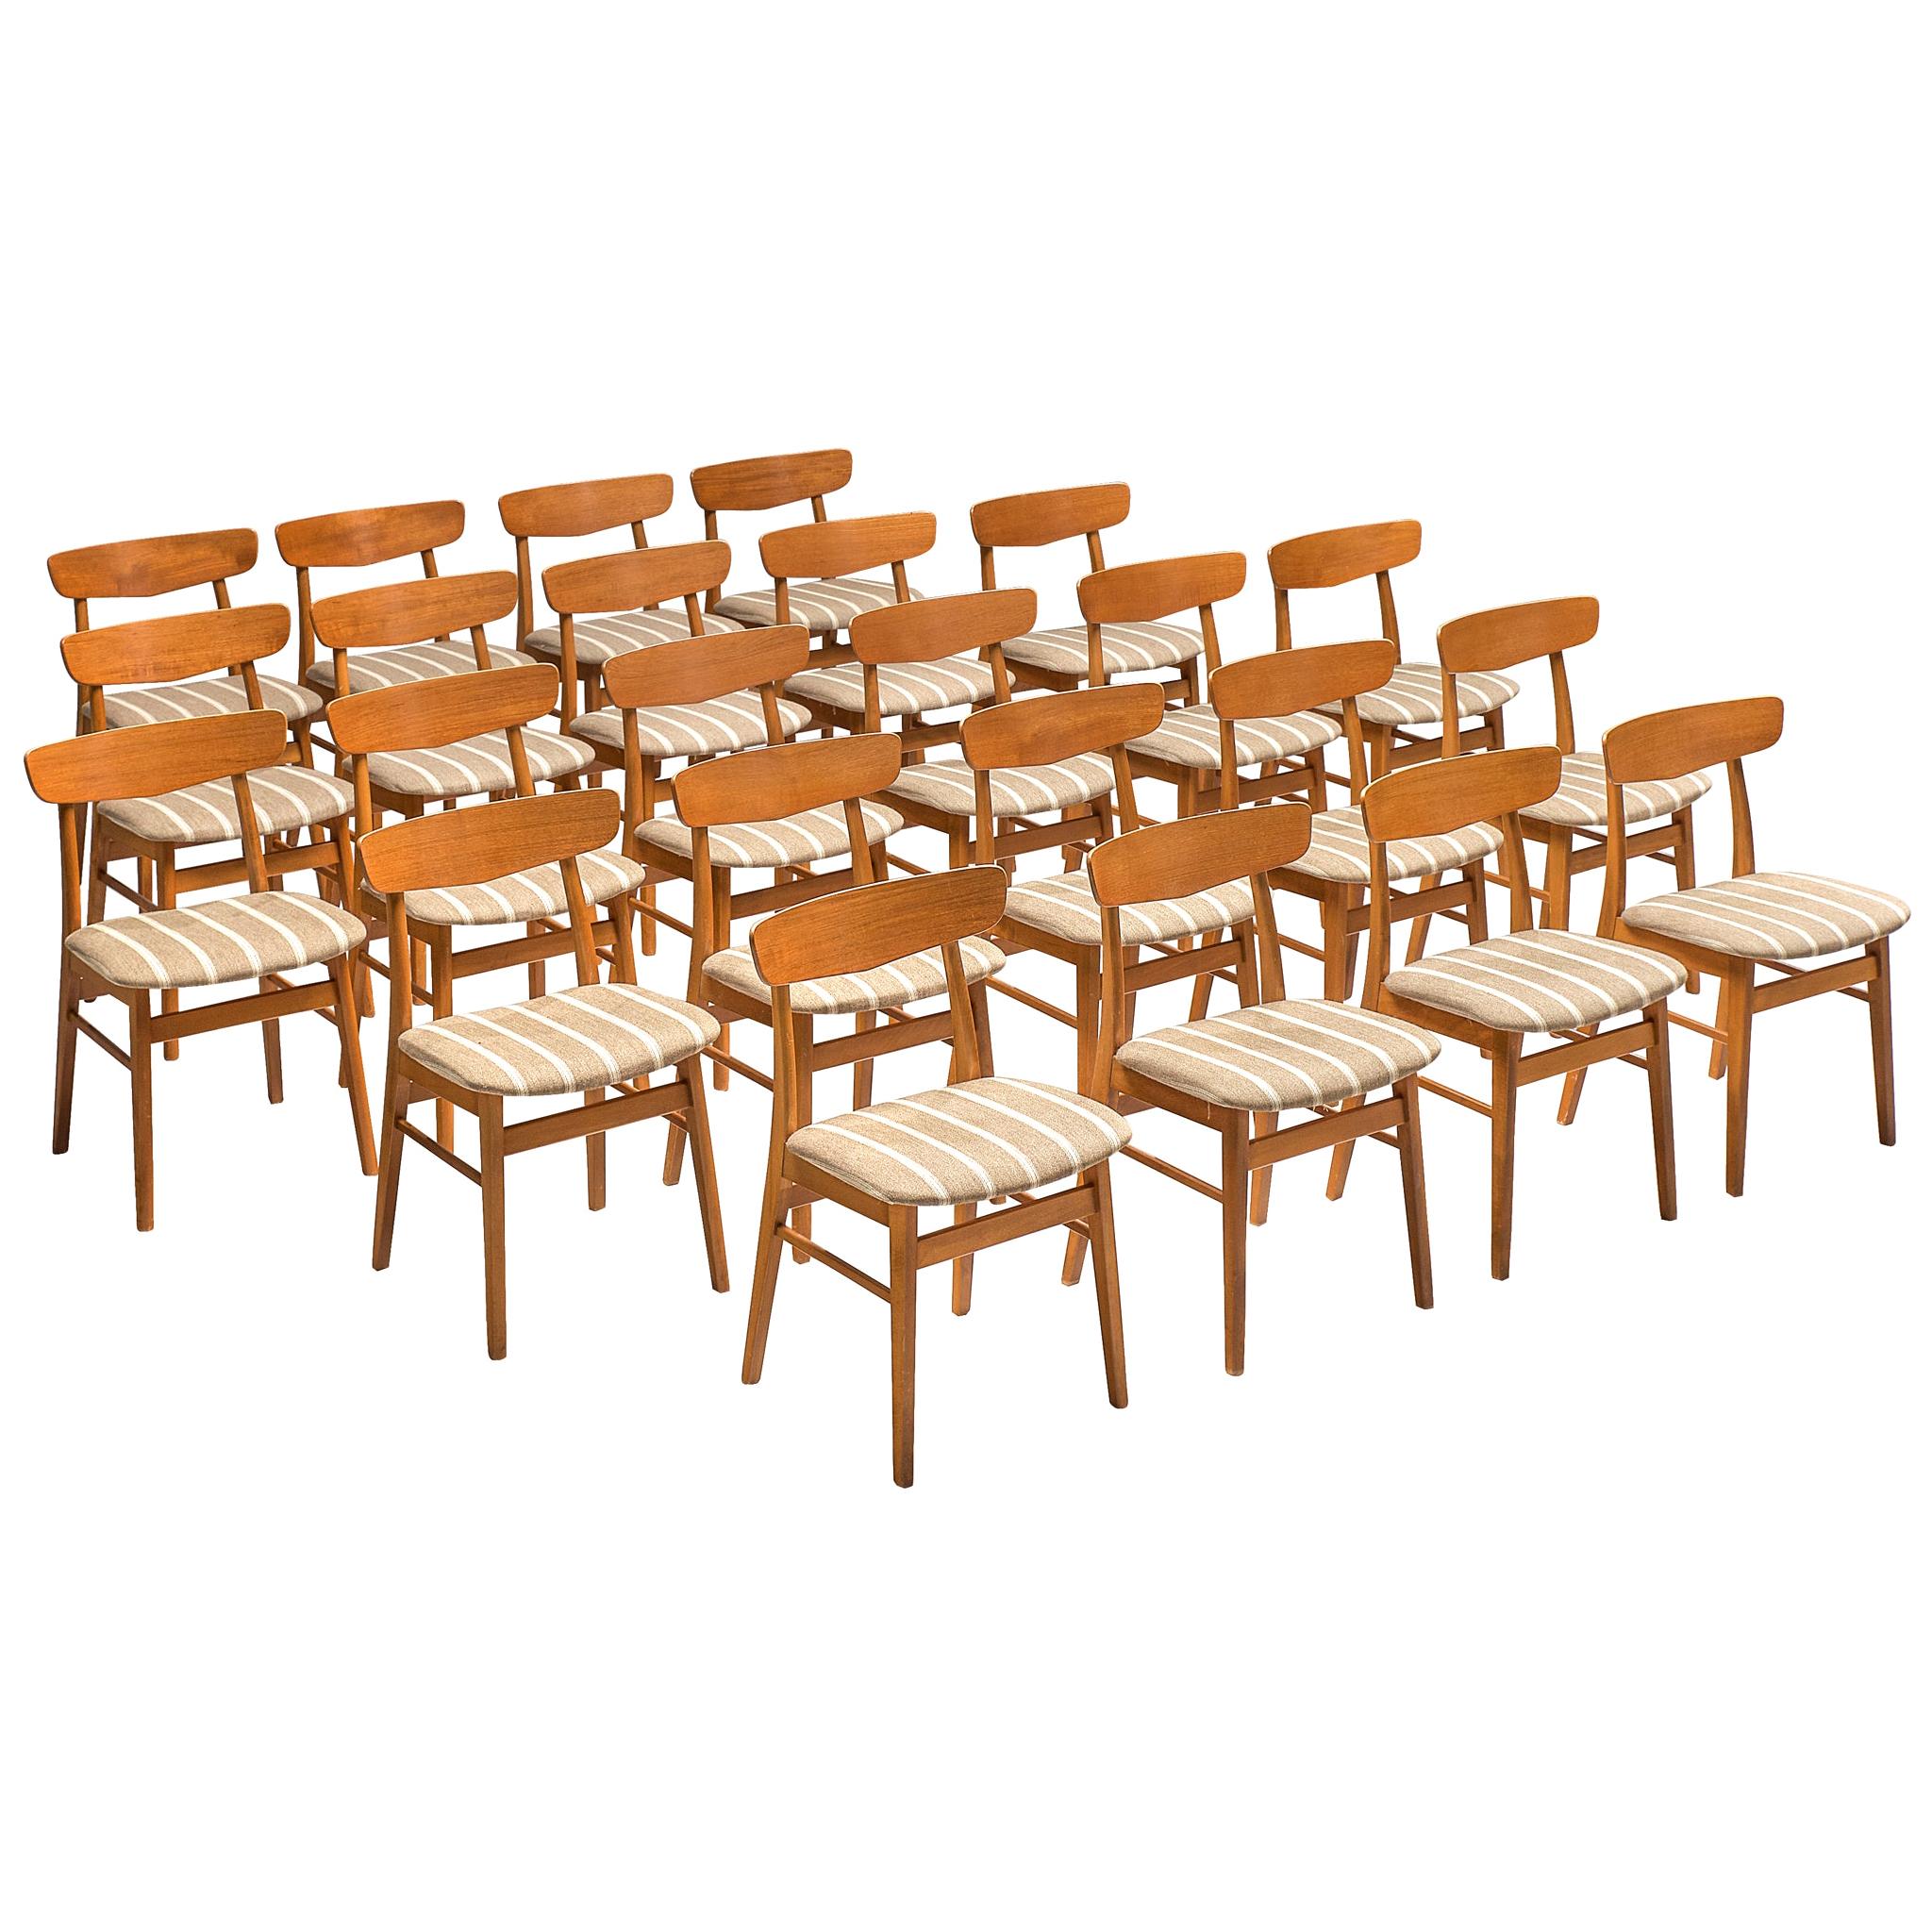 Danish Dining Chairs in Teak and Beige Striped Upholstery